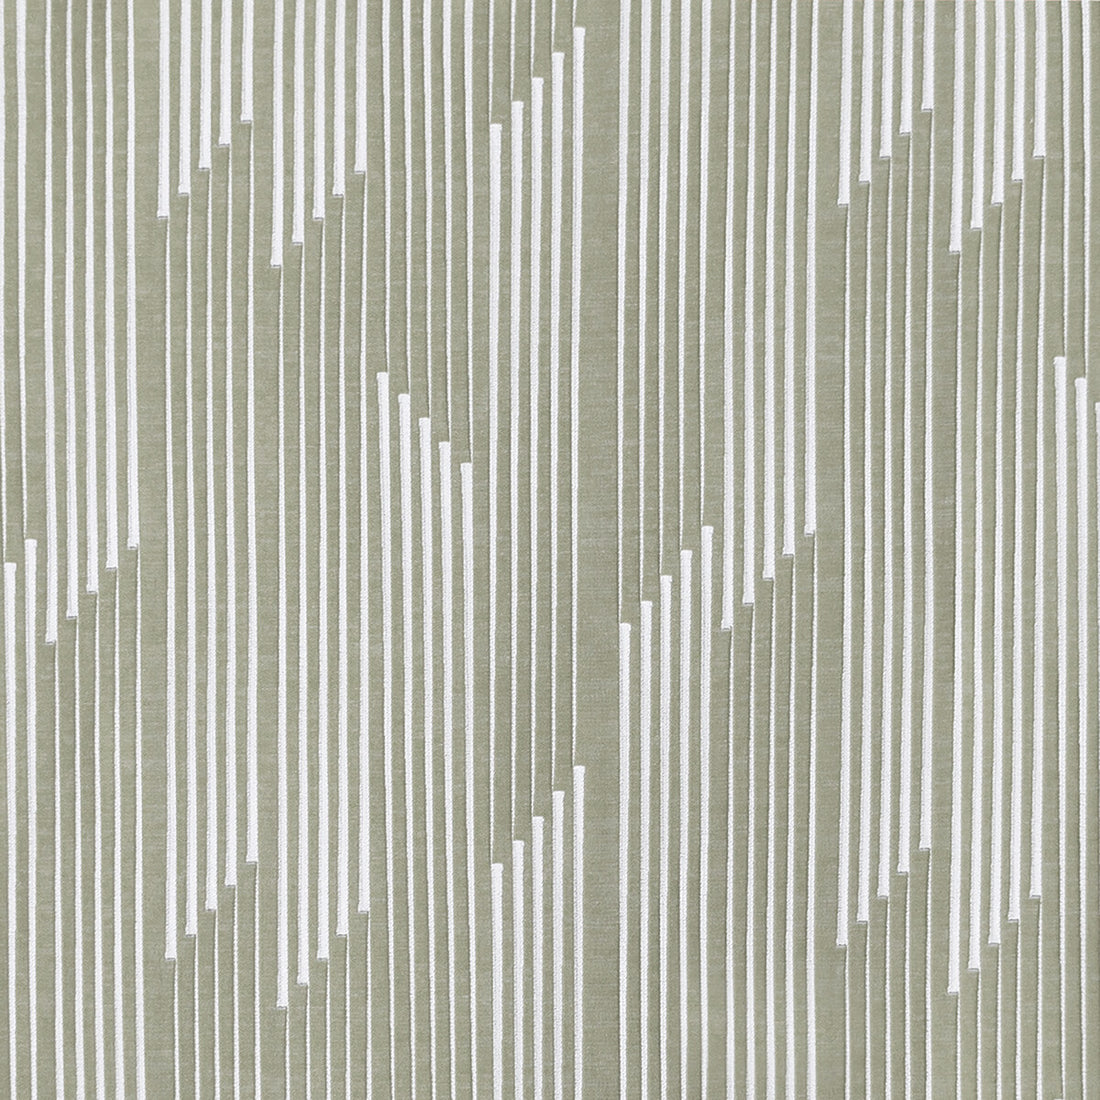 Sui fabric in beige color - pattern GDT5644.005.0 - by Gaston y Daniela in the Gaston Japon collection